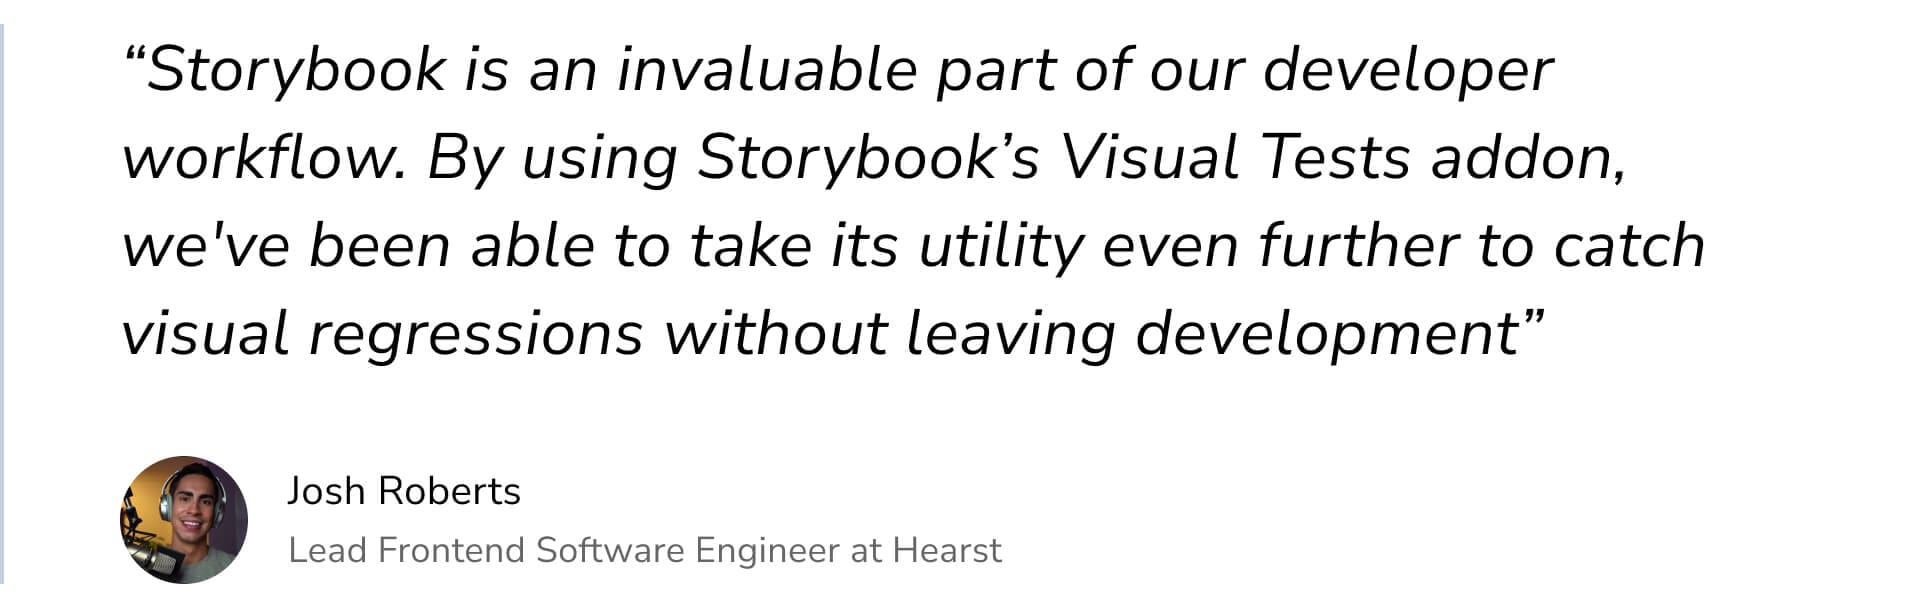 "Storybook is an invaluable part of our developer workflow. By using Storybook's Visual Tests addon, we've been able to take its utility even further to catch visual regressions without leaving development" by Josh Roberts Lead Frontend Software Engineer at Hearst